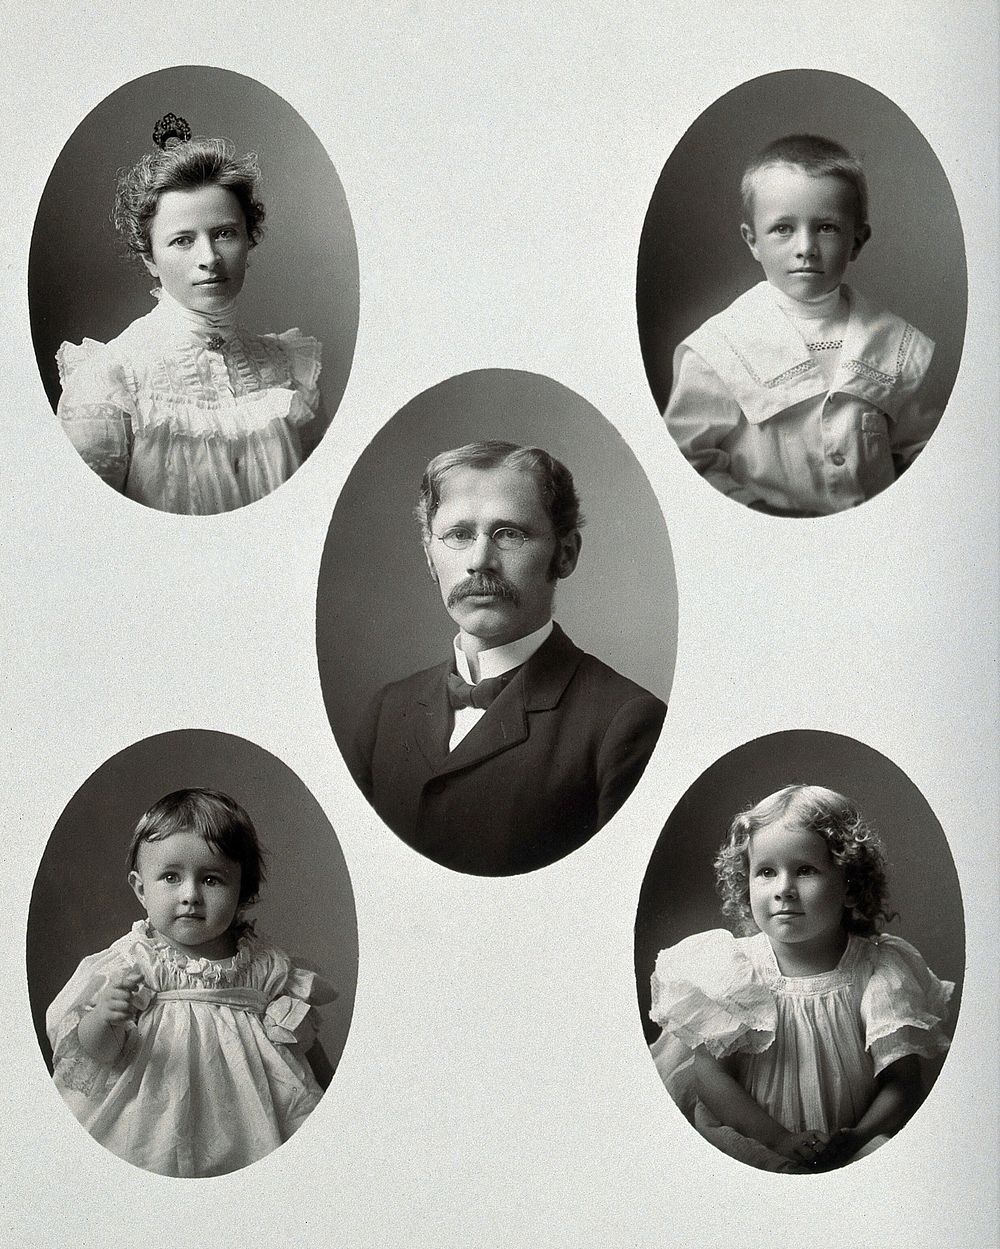 Edward Kremers and family. Photograph by F.W. Curtiss, 1899.